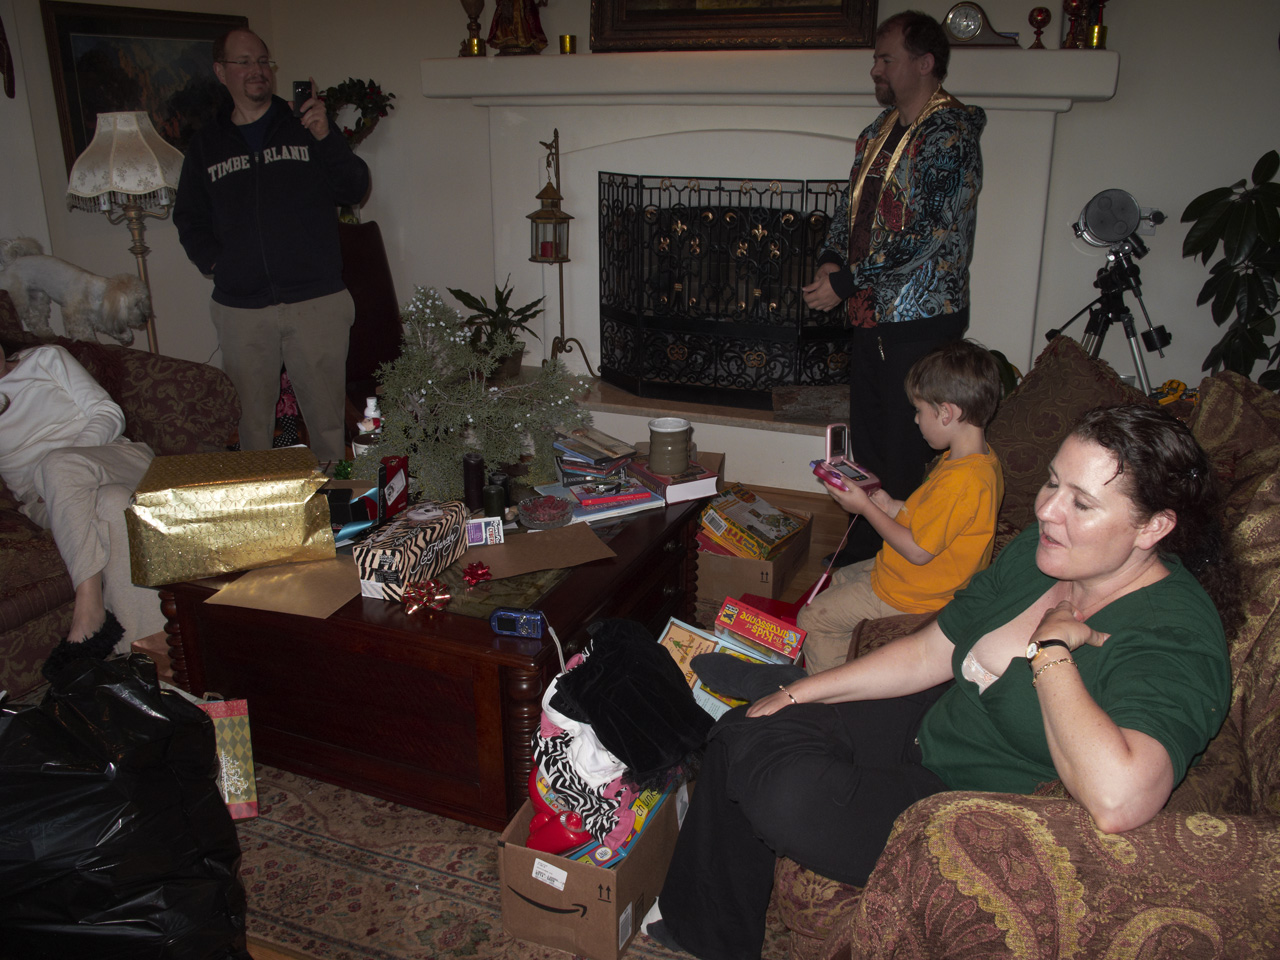 Keri and Marc, James, Steve, and Jackie playing with their Christmas gifts in Marc's living room